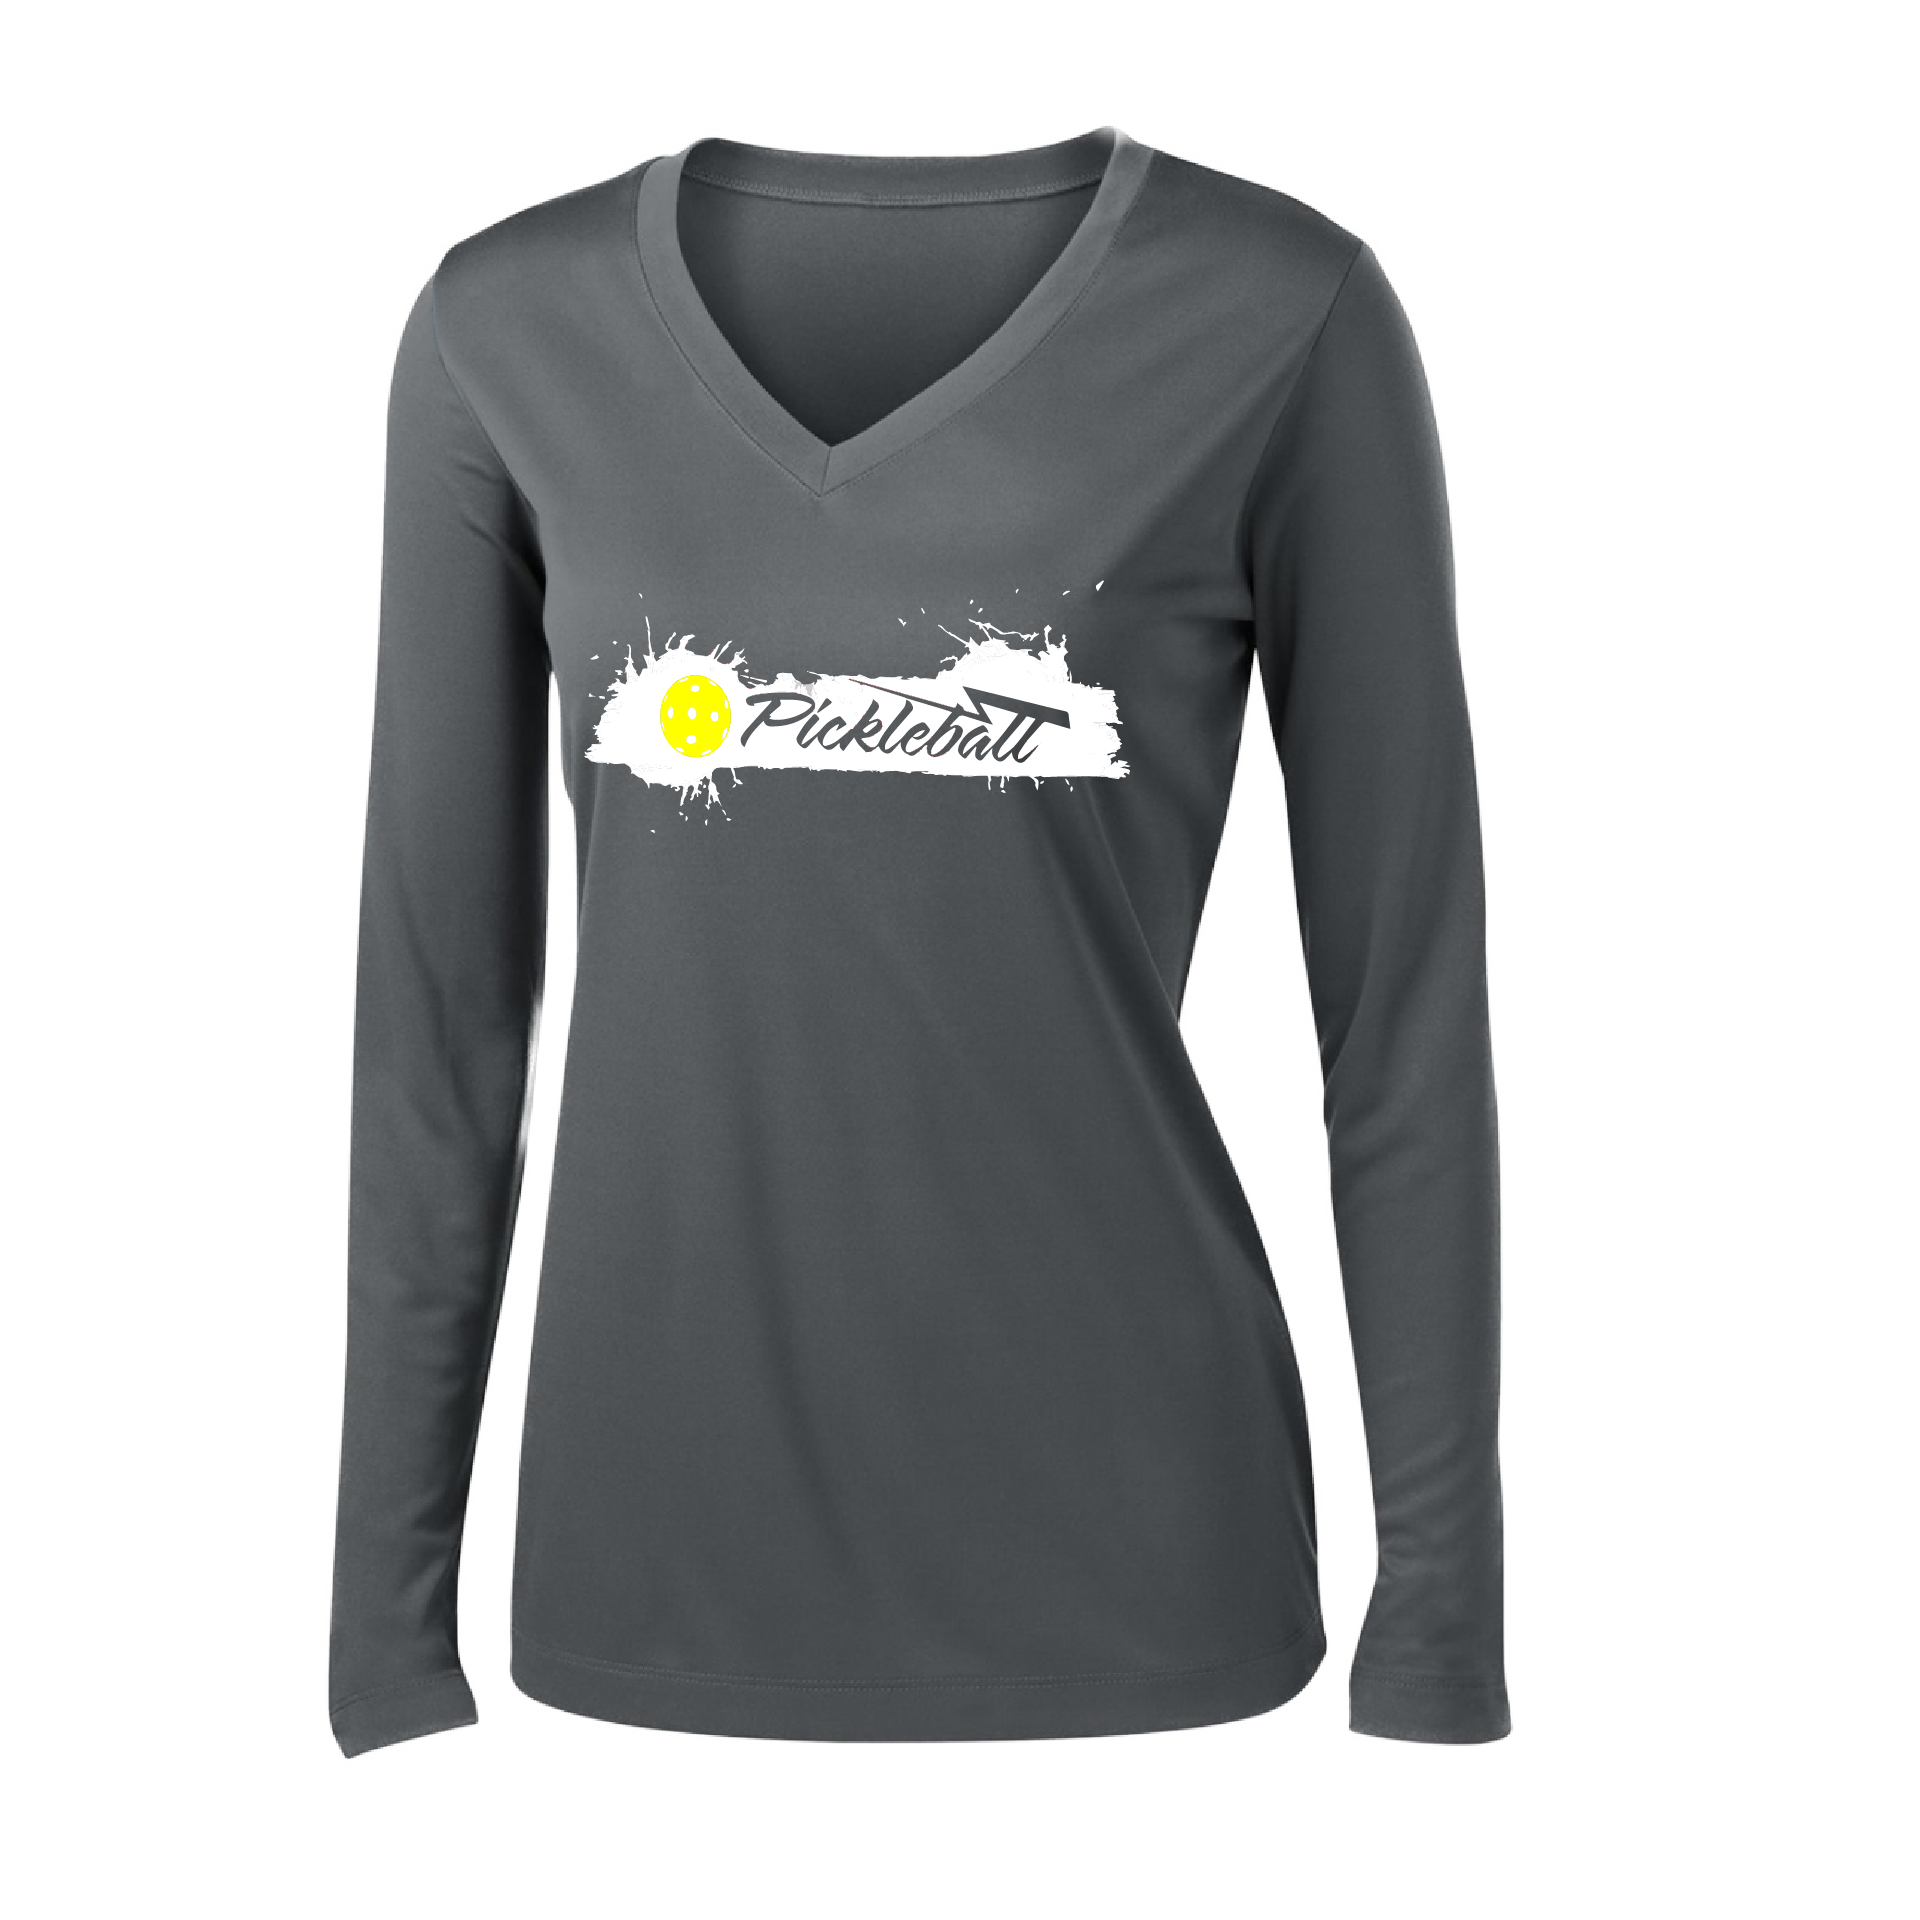 Pickleball Design: Extreme  Women's Styles: Long Sleeve V-Neck  Turn up the volume in this Women's shirt with its perfect mix of softness and attitude. Material is ultra-comfortable with moisture wicking properties and tri-blend softness. PosiCharge technology locks in color. Highly breathable and lightweight.